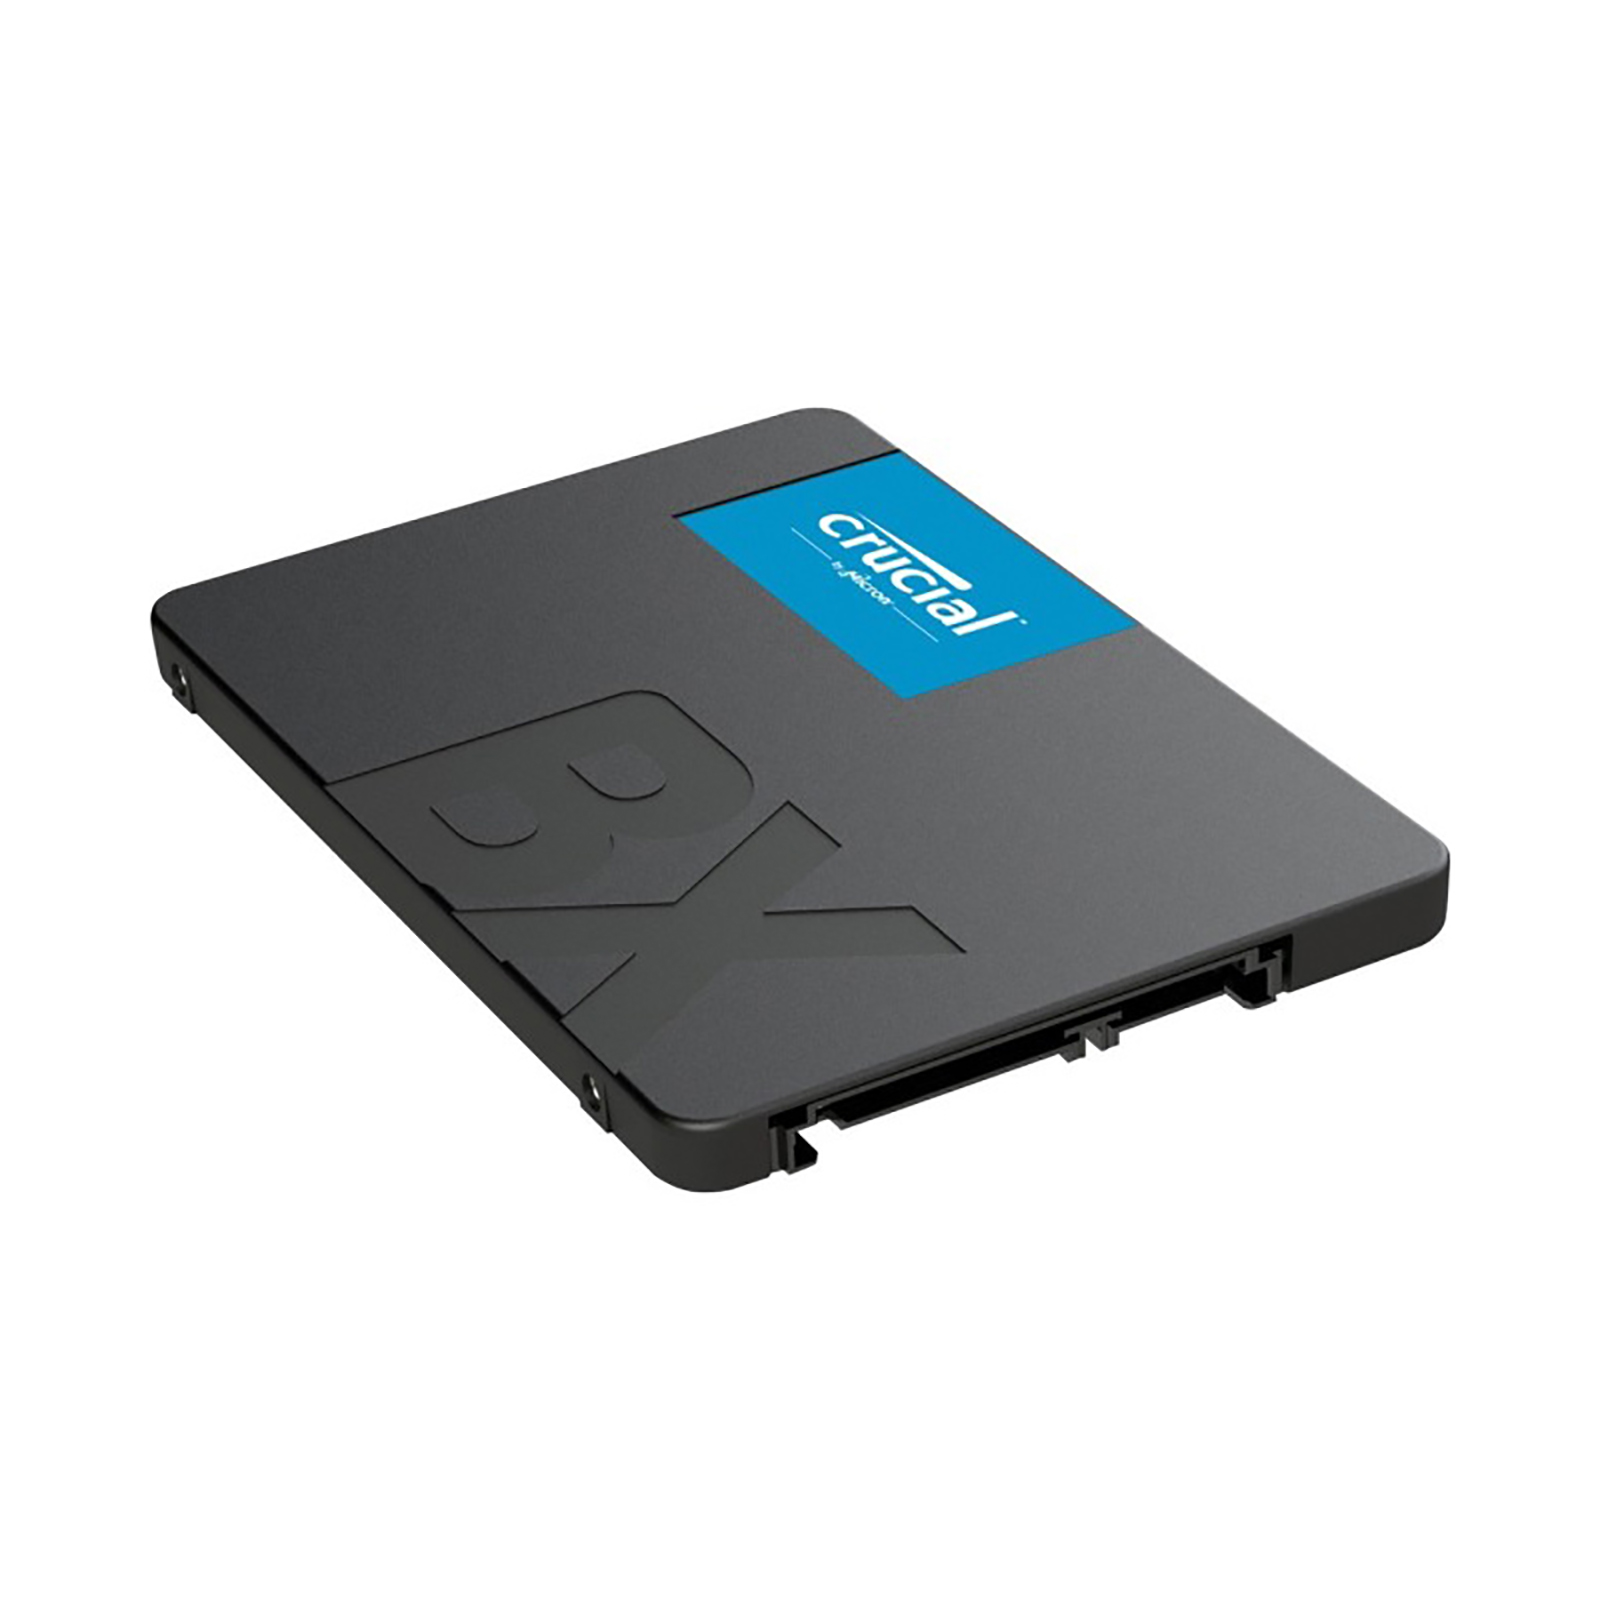 Micron CT240BX500SSD1 CRUCIAL BY - SSD CRUCIAL BX500 240GB NAND SATA 2.5IN SSD